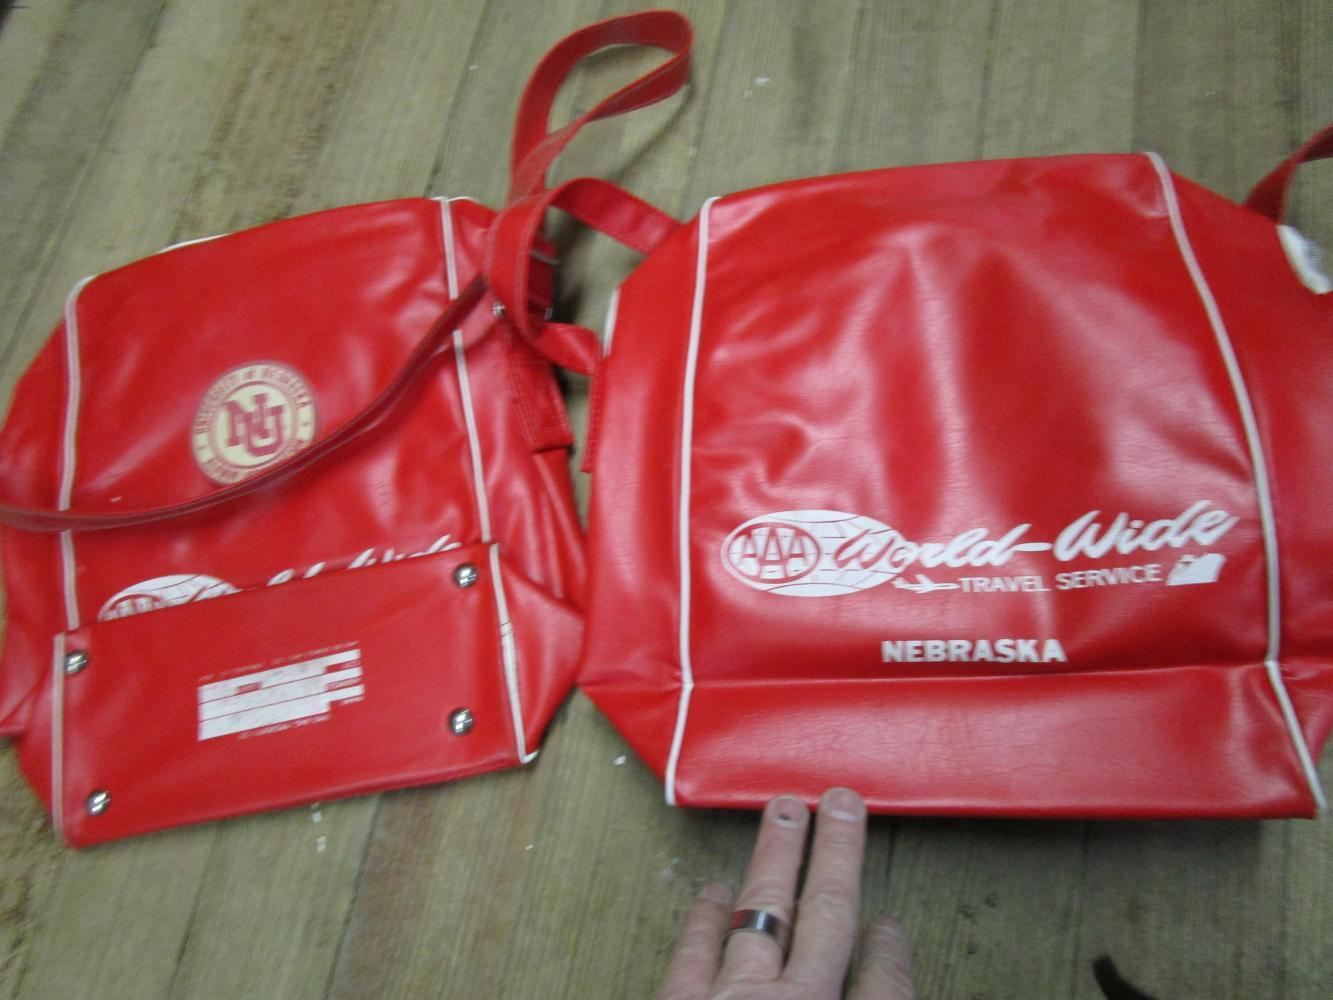 Old 1970s? Go Big Red AAA Travel Service Flight Bag